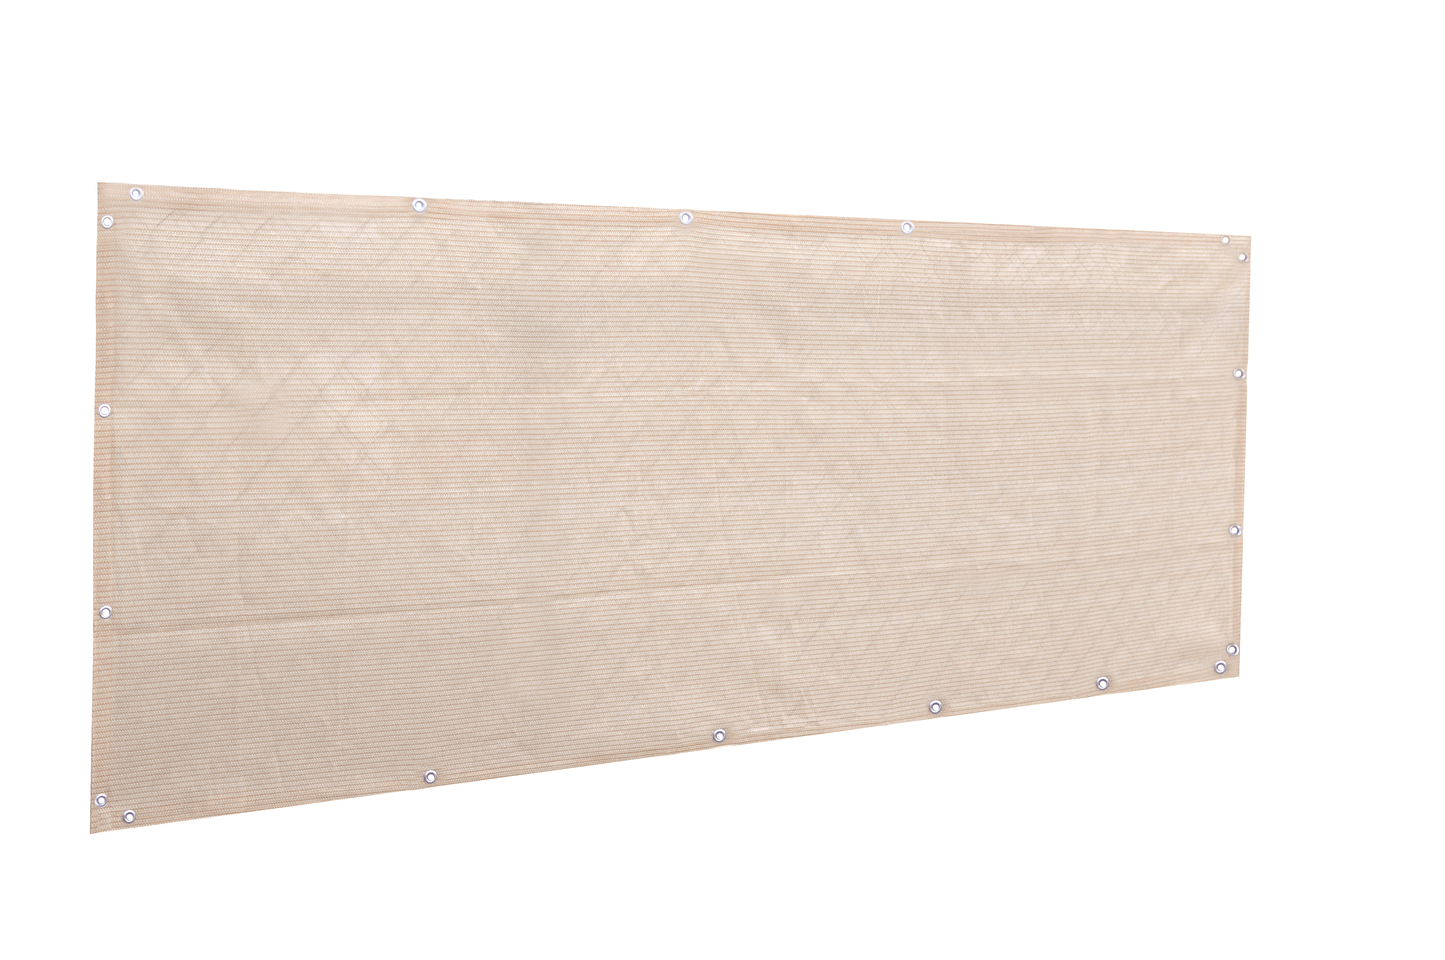 Commercial Balcony Windscreen Fence Privacy Screen Cover –Beige